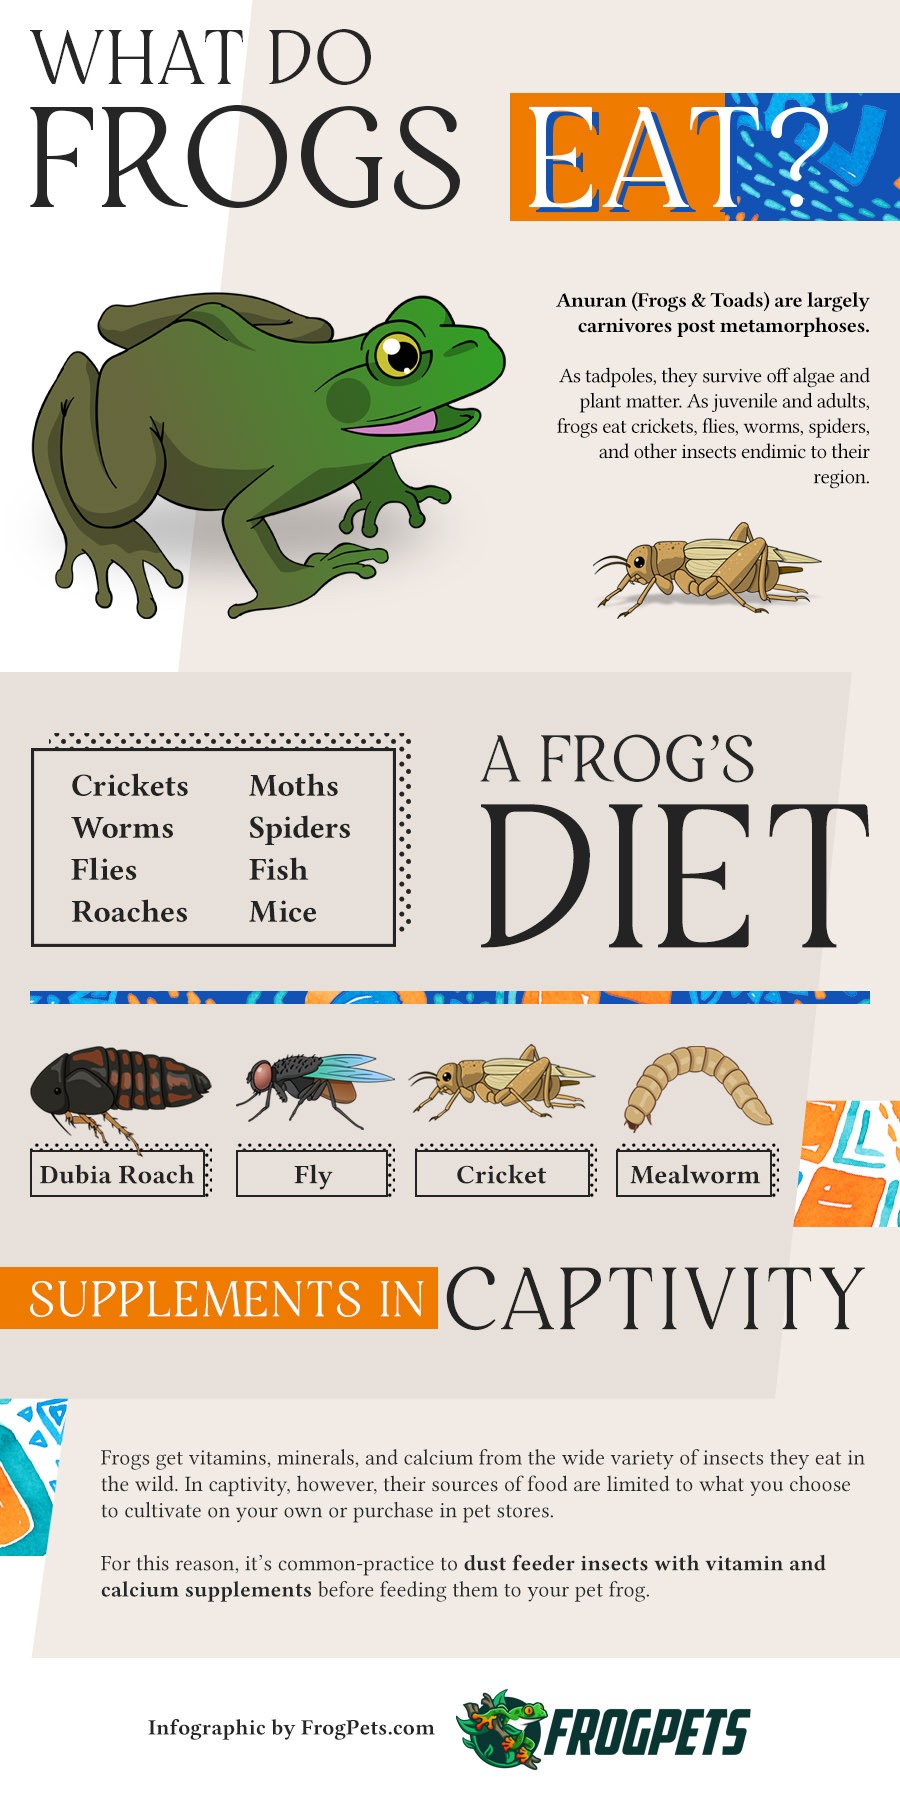 What Do Frogs Eat? Infographic